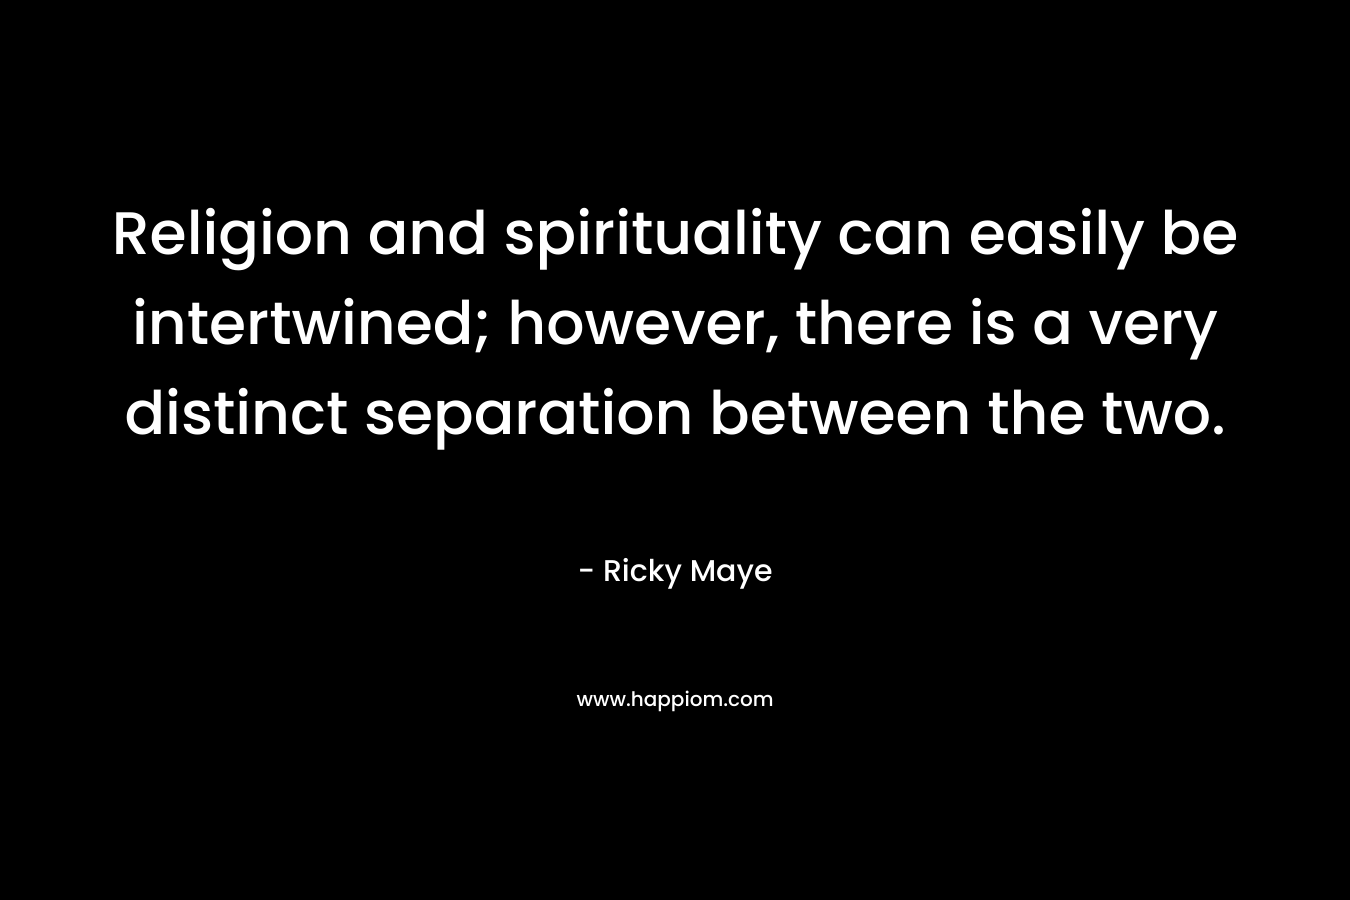 Religion and spirituality can easily be intertwined; however, there is a very distinct separation between the two.